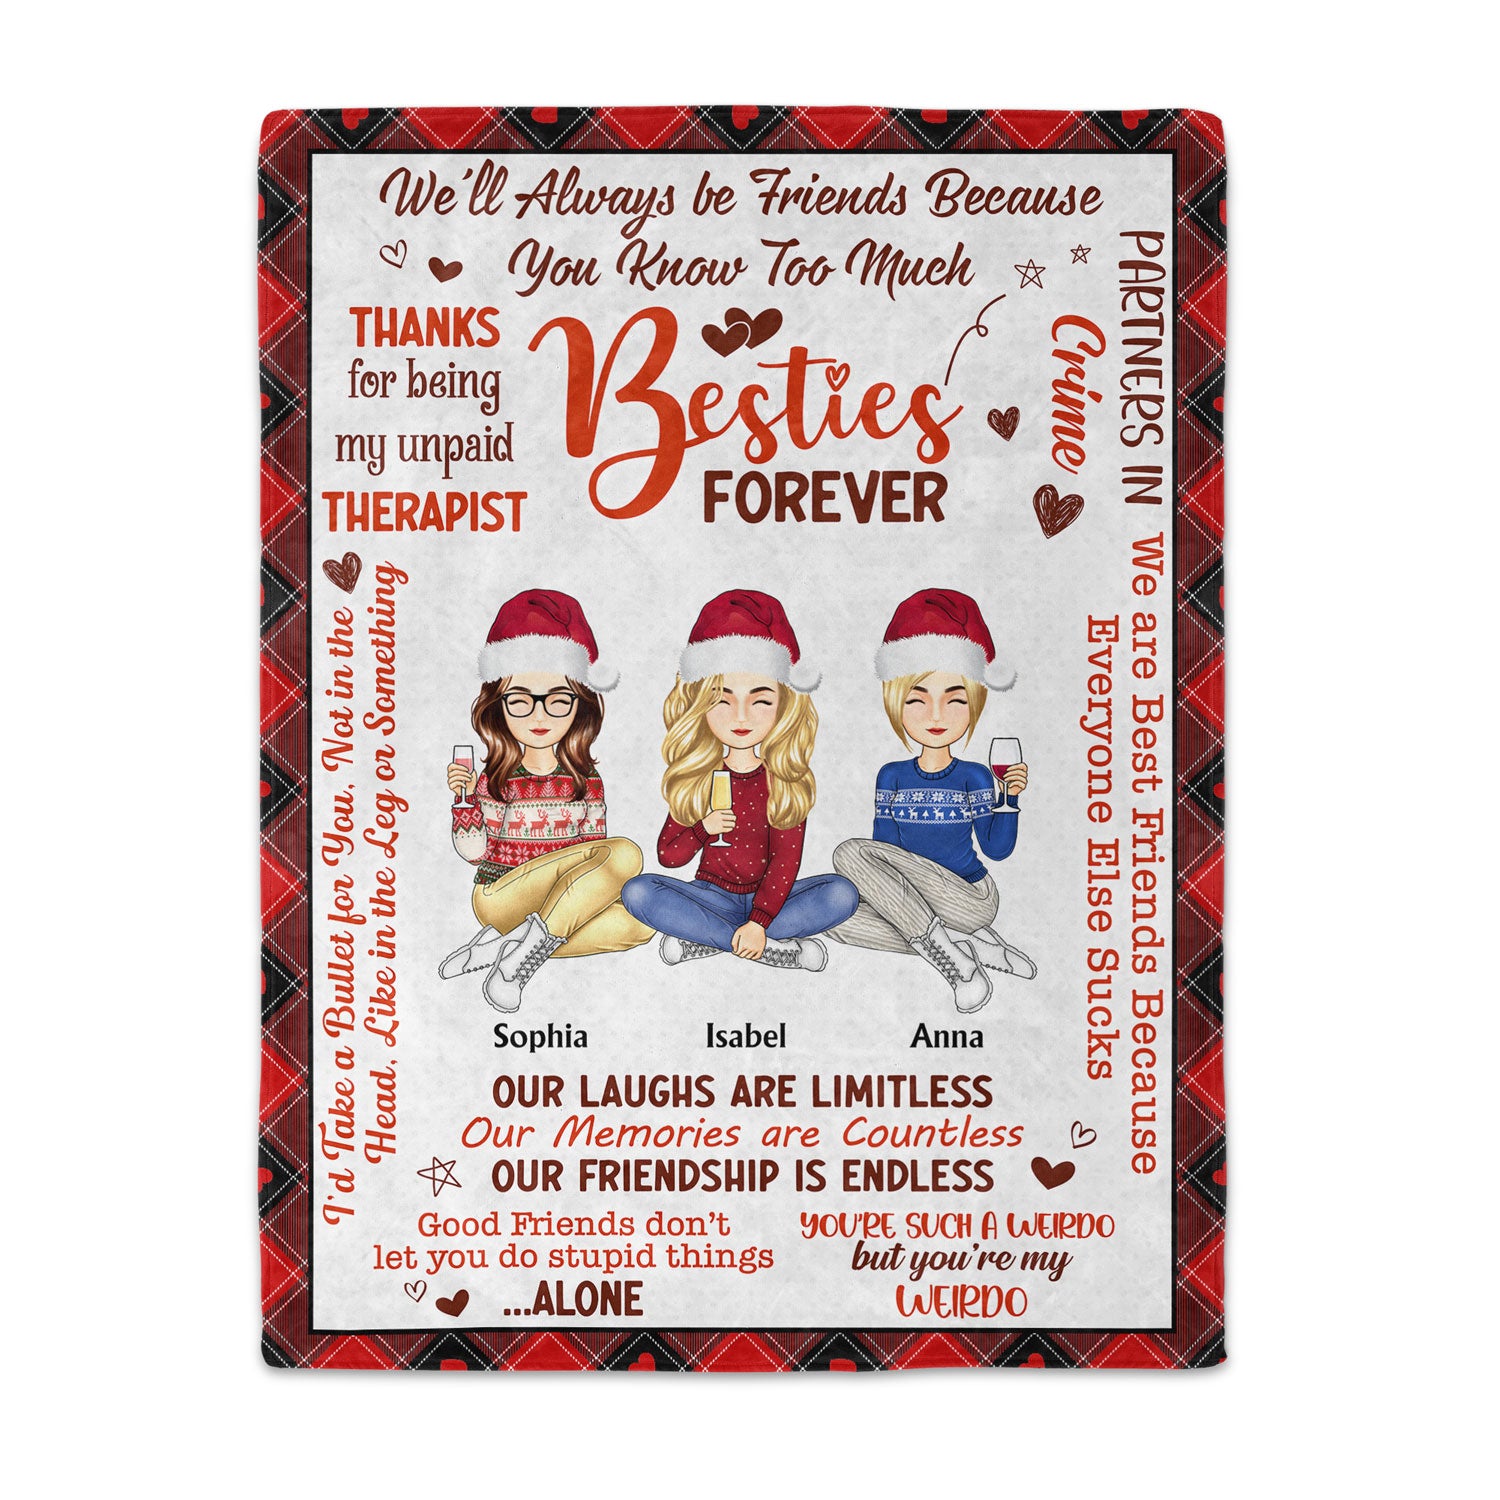 Besties Forever Partners In Crime - Birthday, Loving Gift For Best Friends, Colleagues, Sibling, Family - Personalized Fleece Blanket